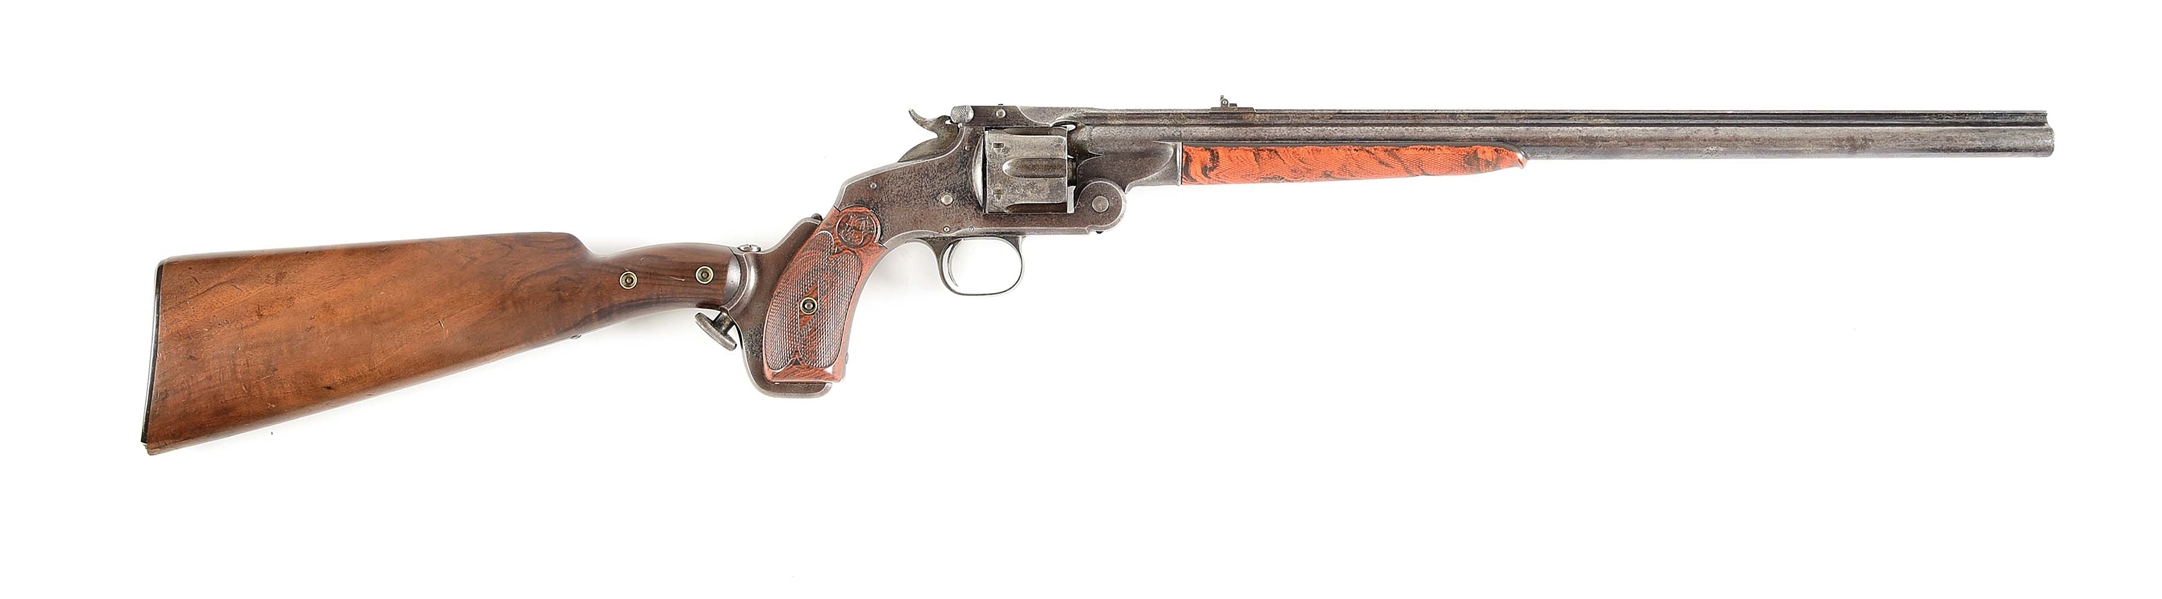 (A) SMITH AND WESSON MODEL 320 REVOLVING RIFLE.